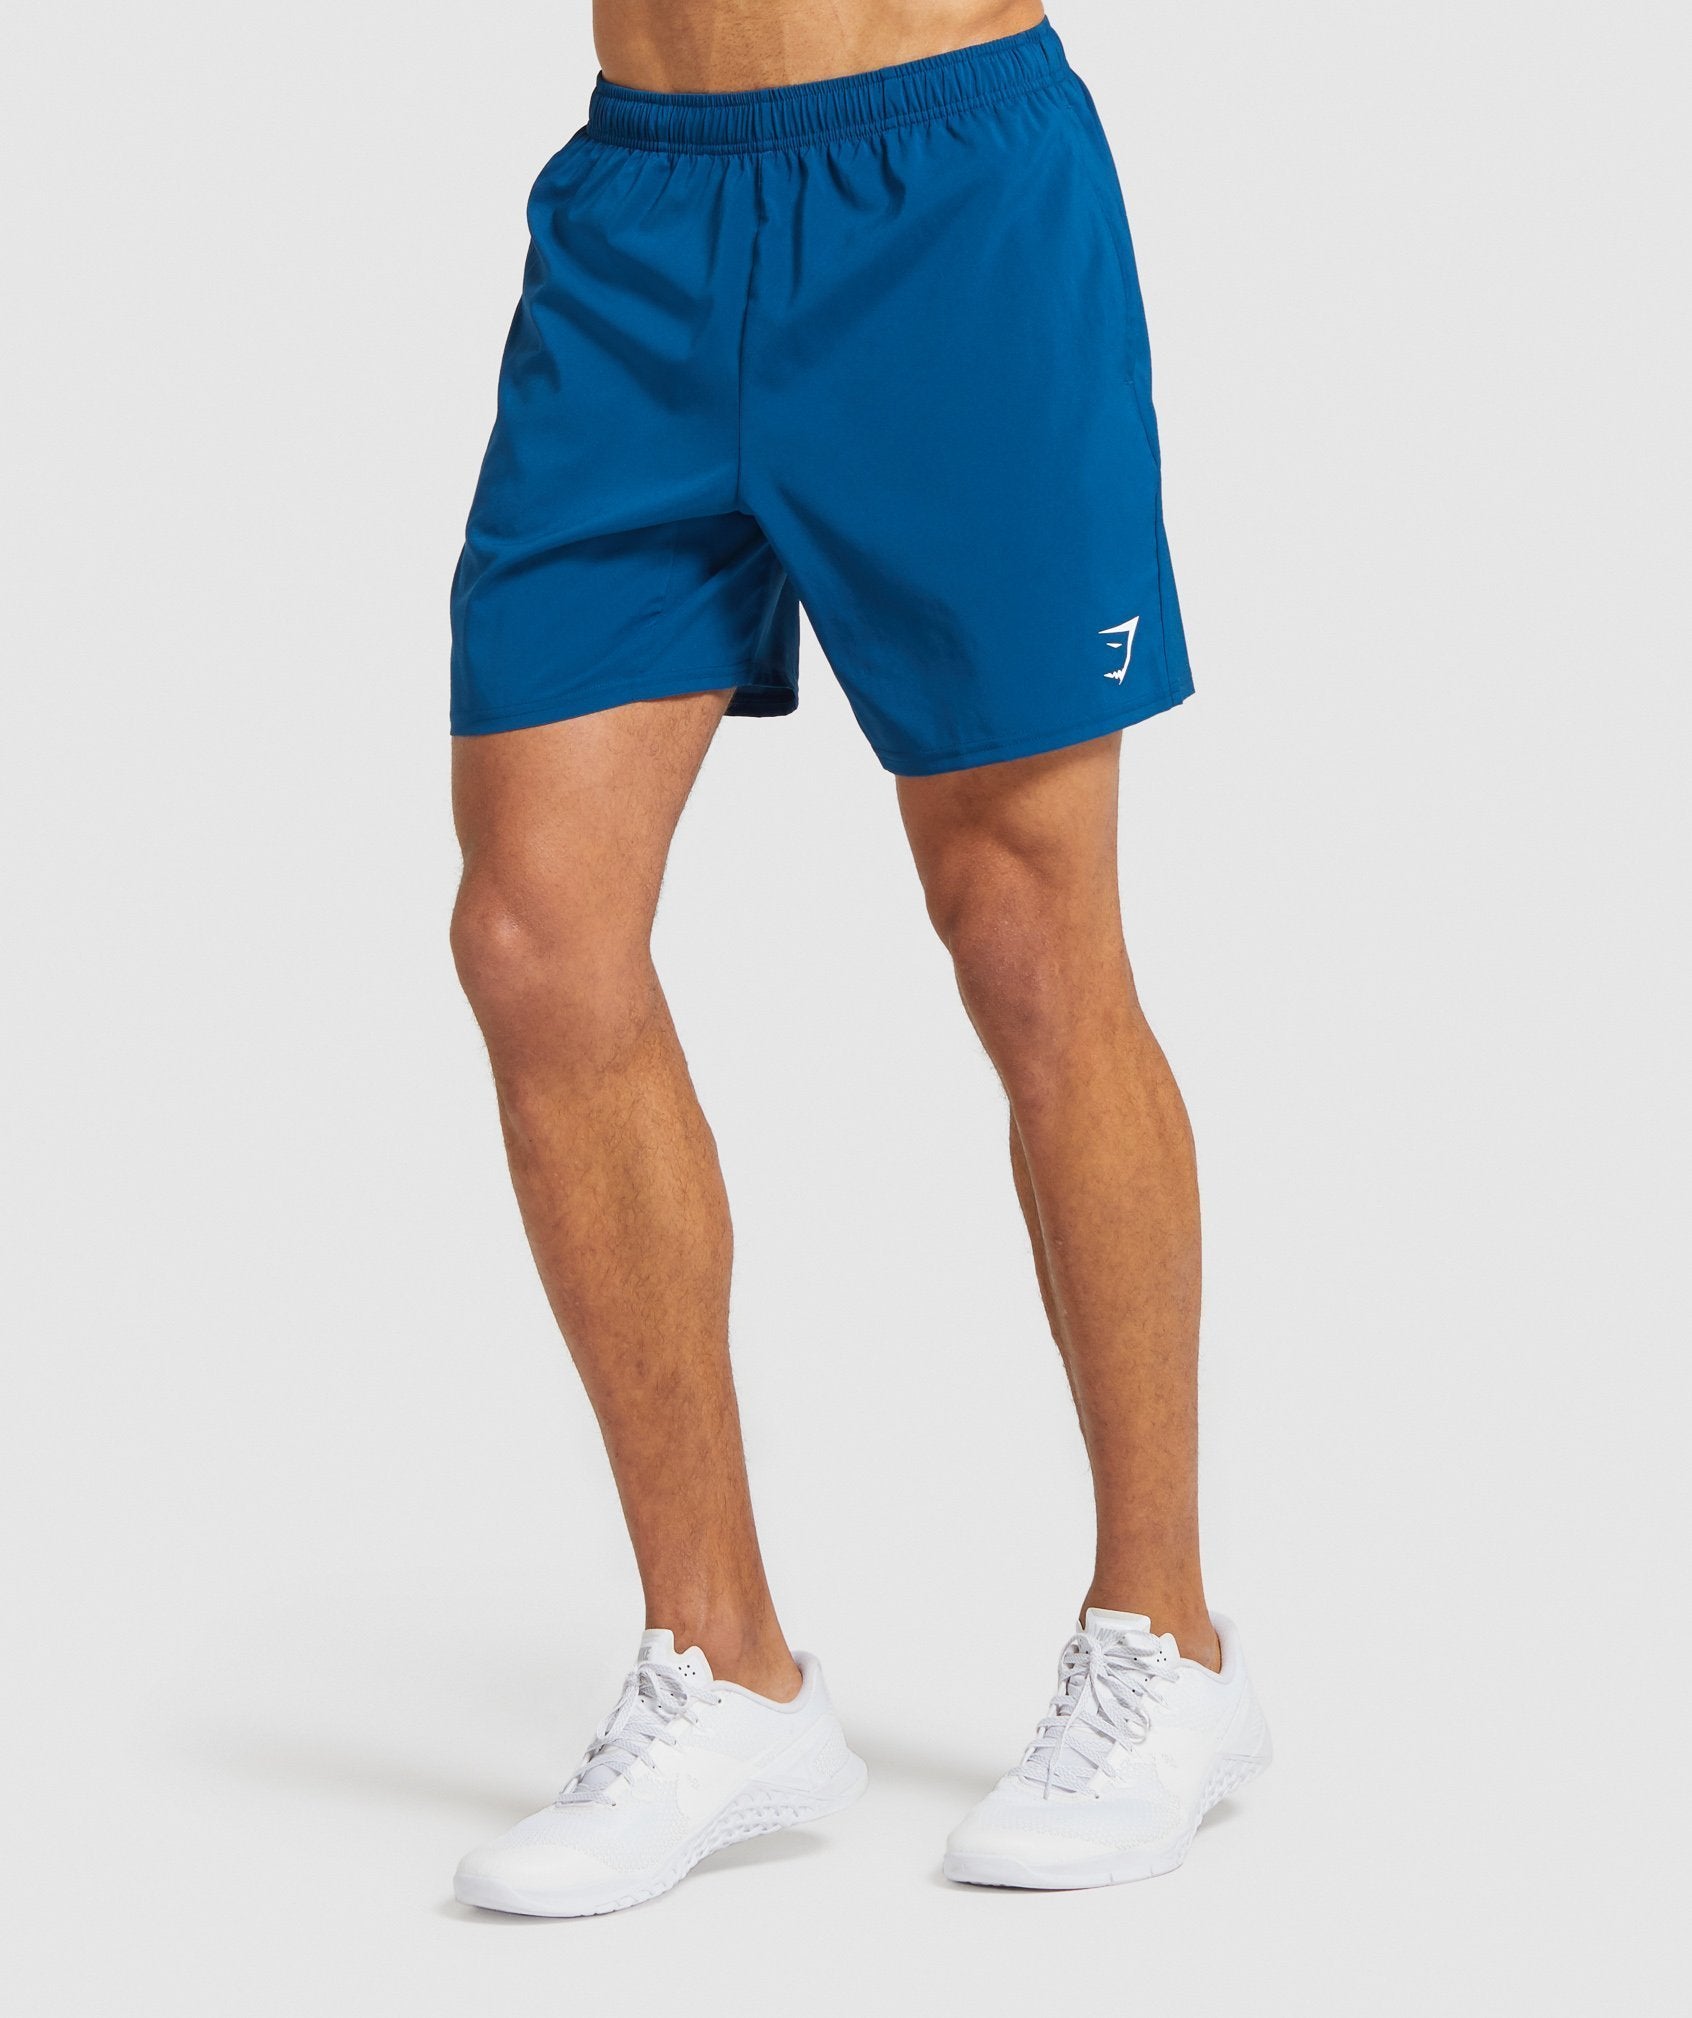 Arrival Shorts in Petrol Blue